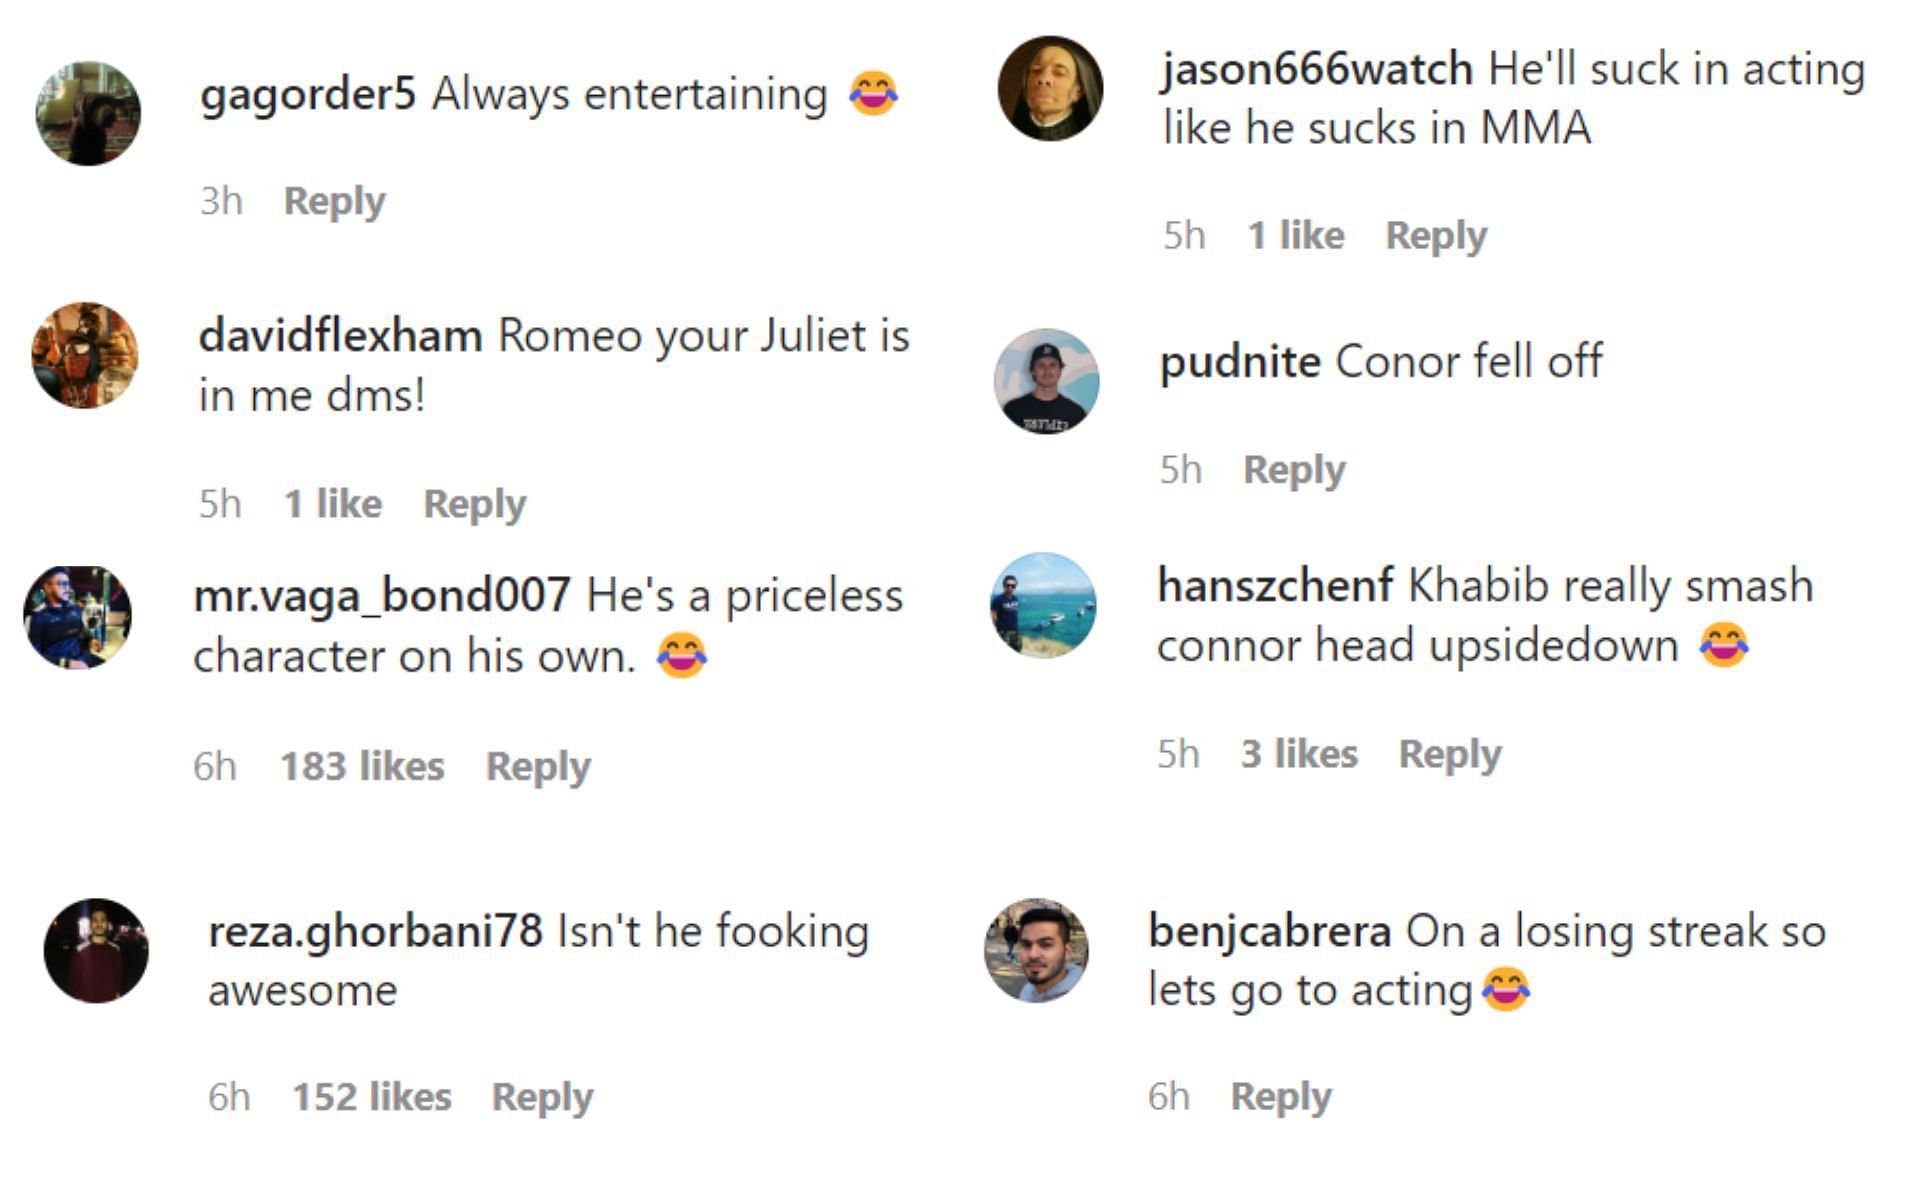 Screenshots of comments on the ESPN post